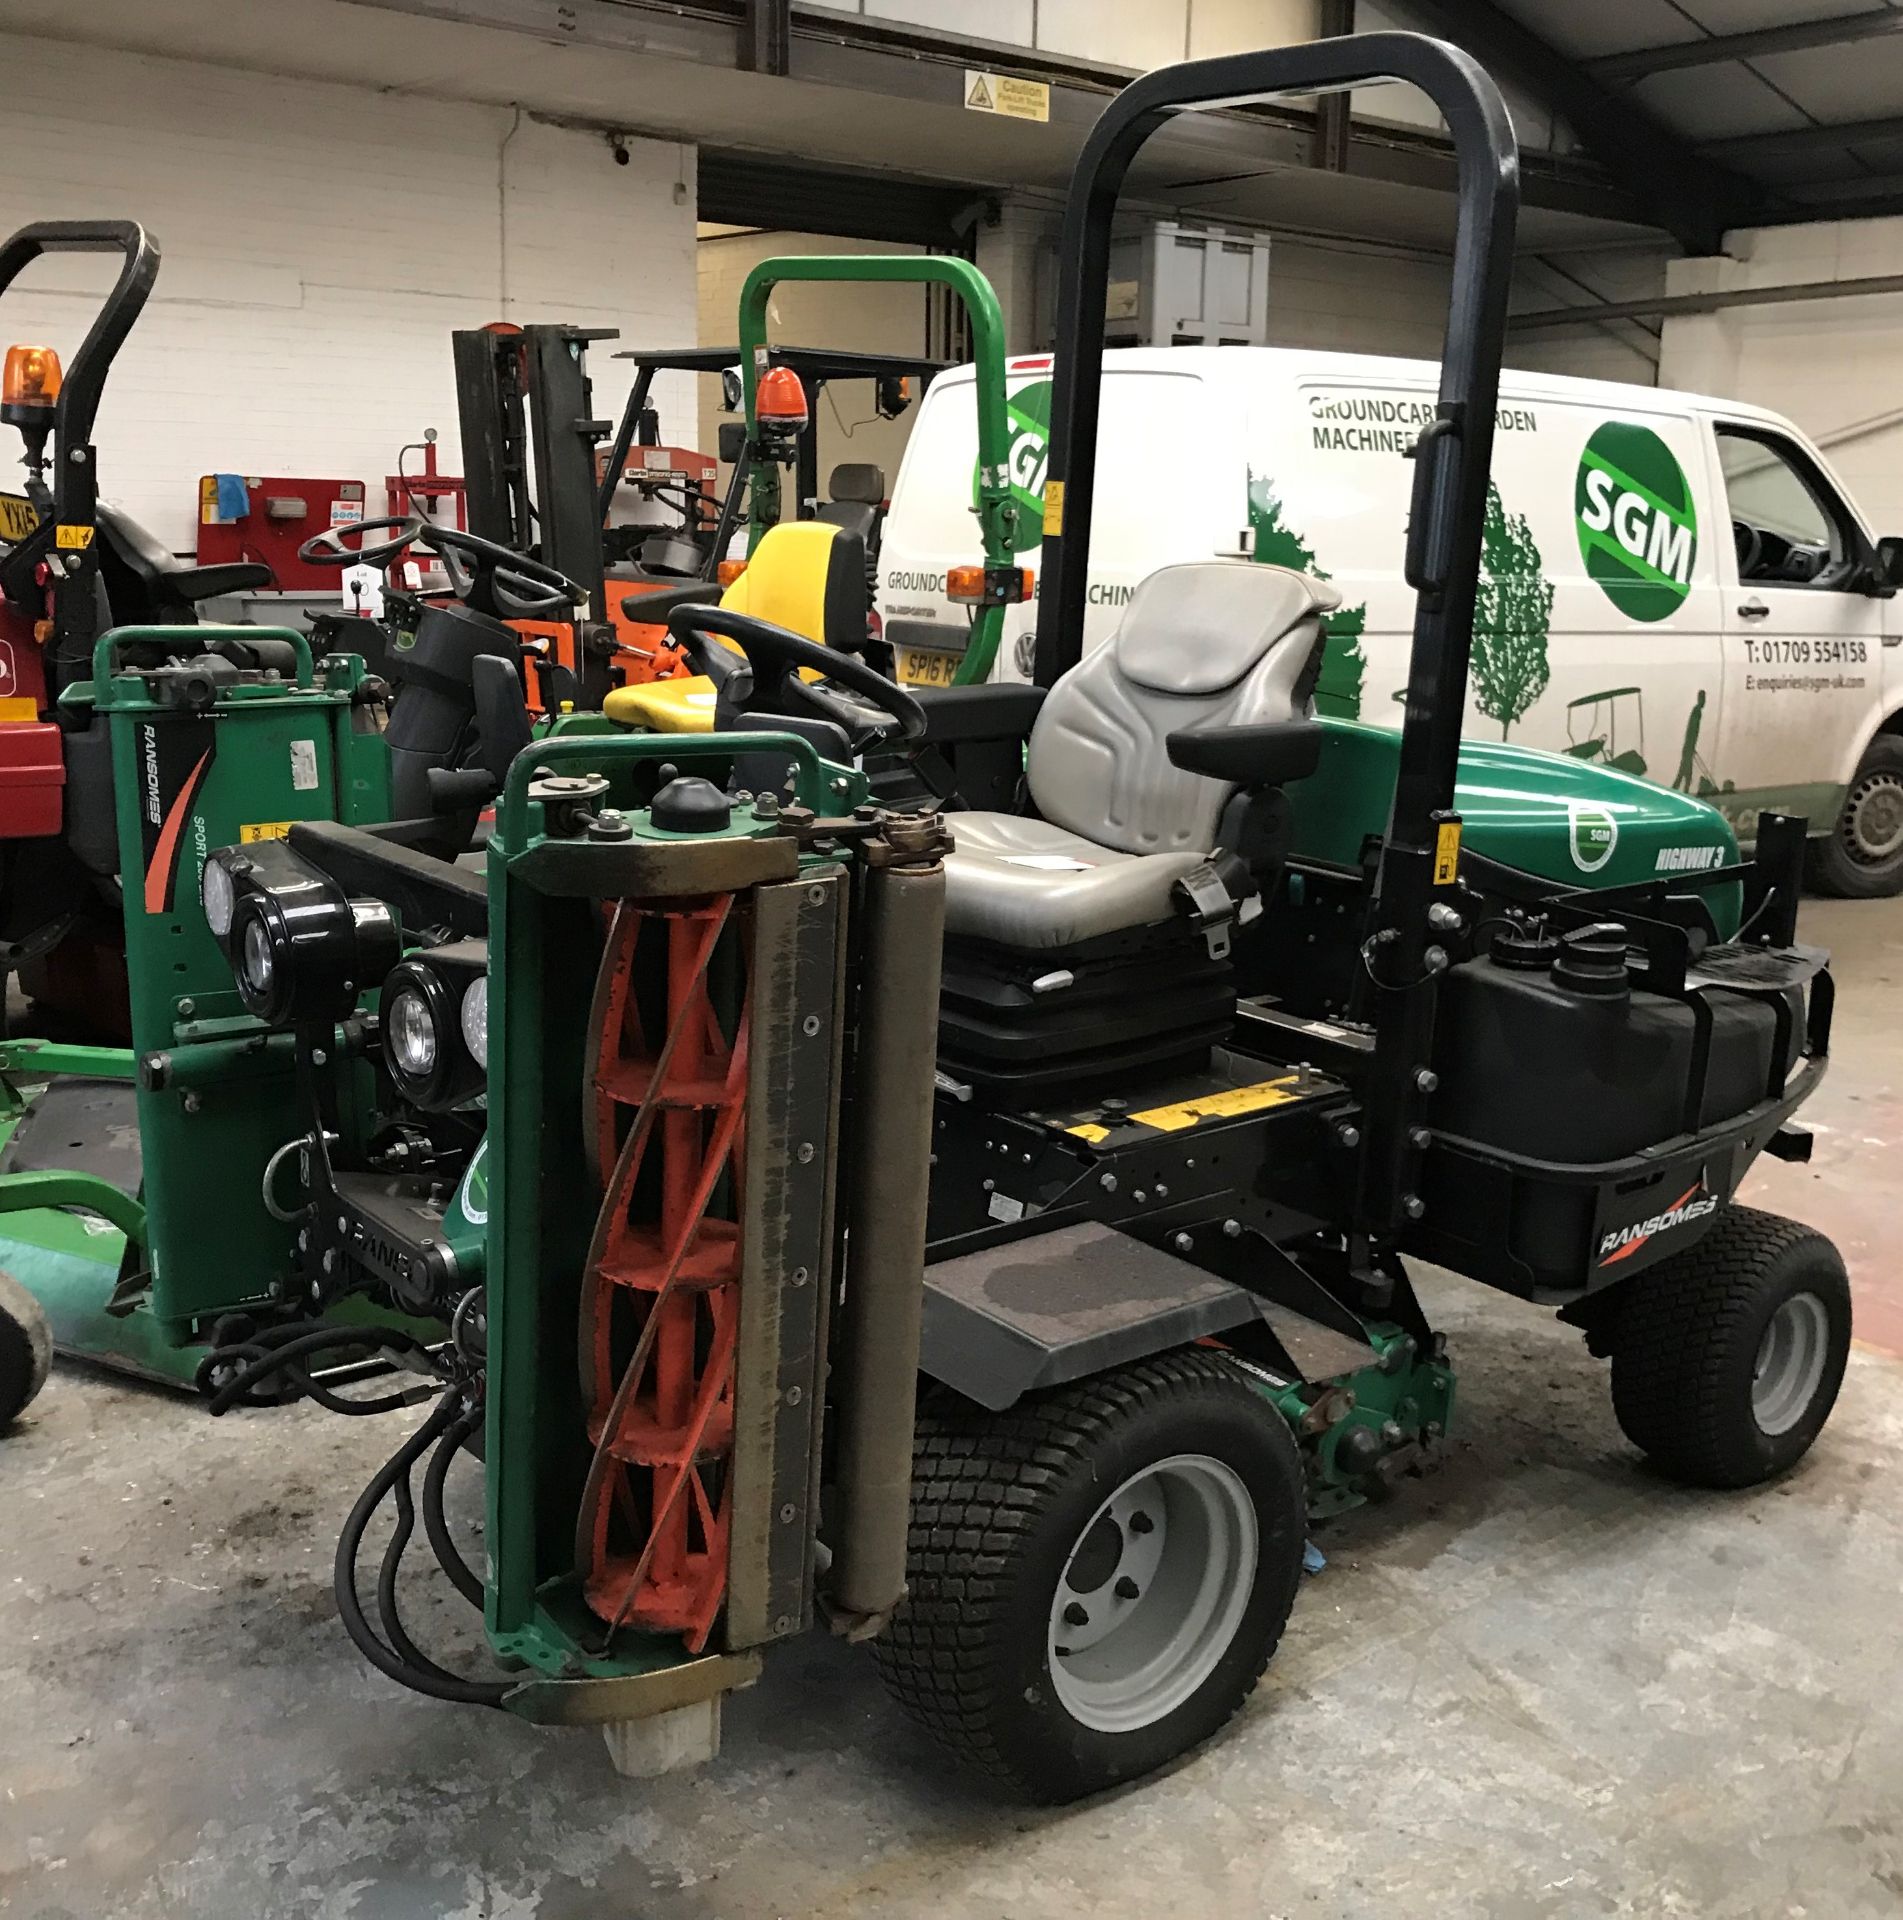 Ransomes Highway 3 4WD Cylinder Mower | 64 Plate